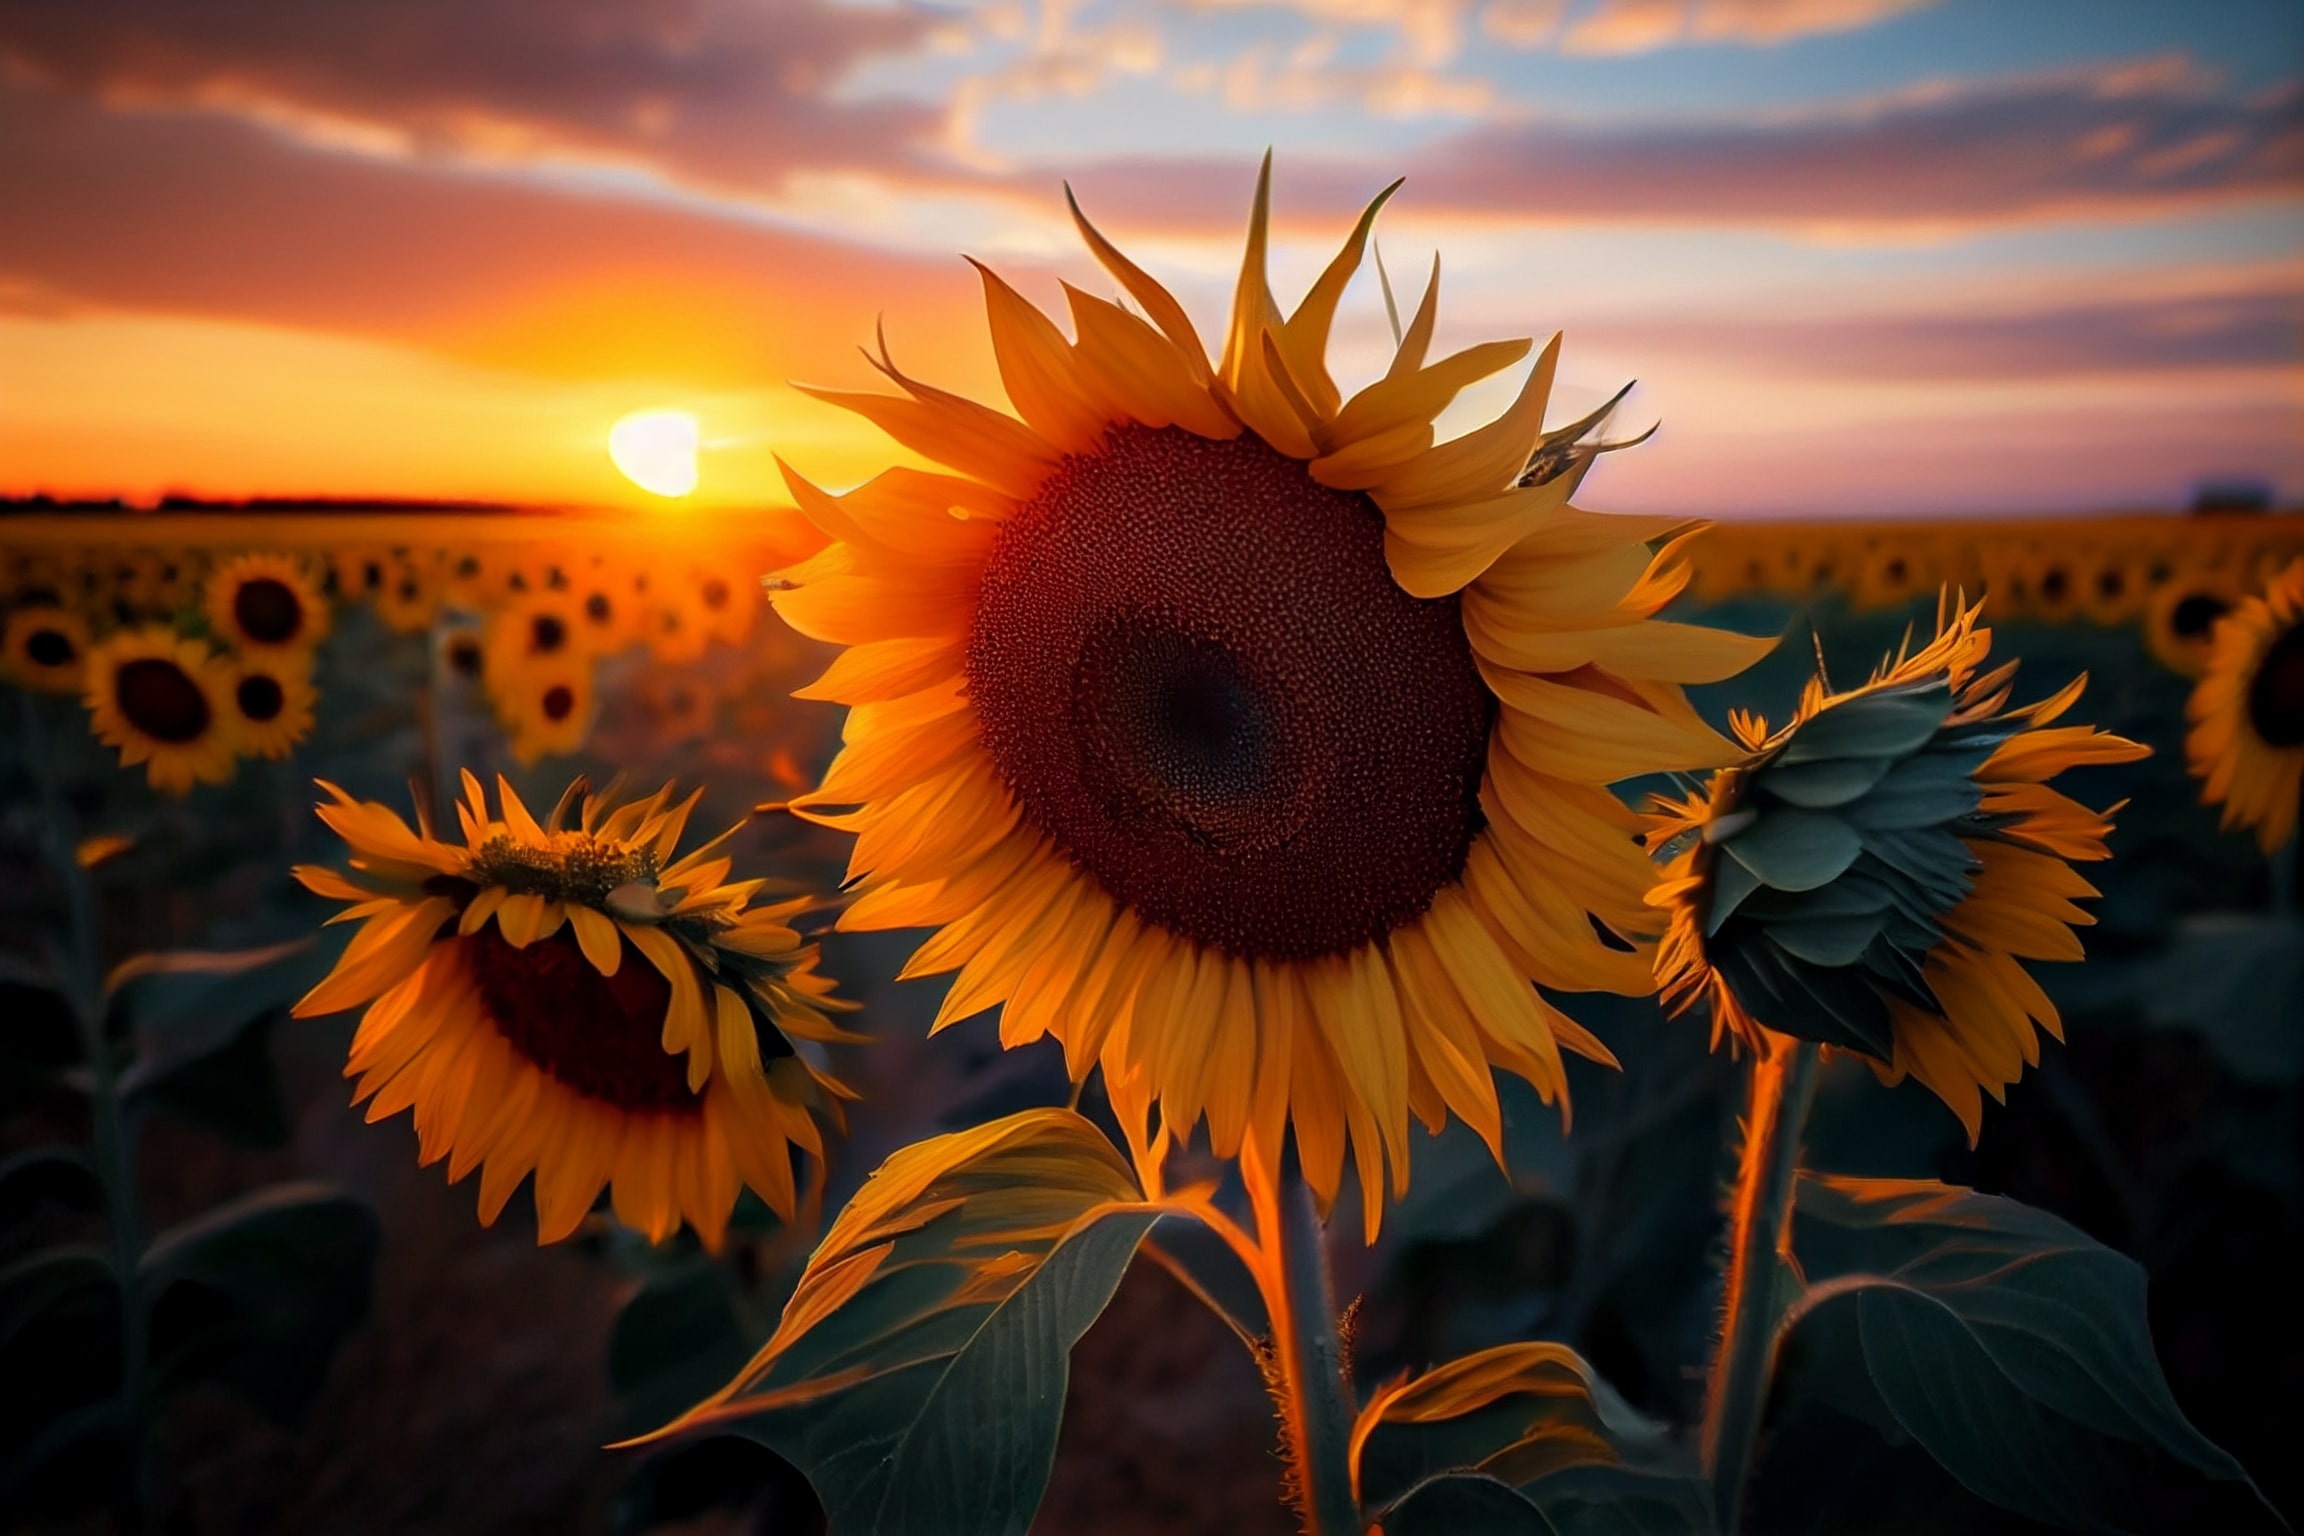 Large sunflower in a field of sunflowers.